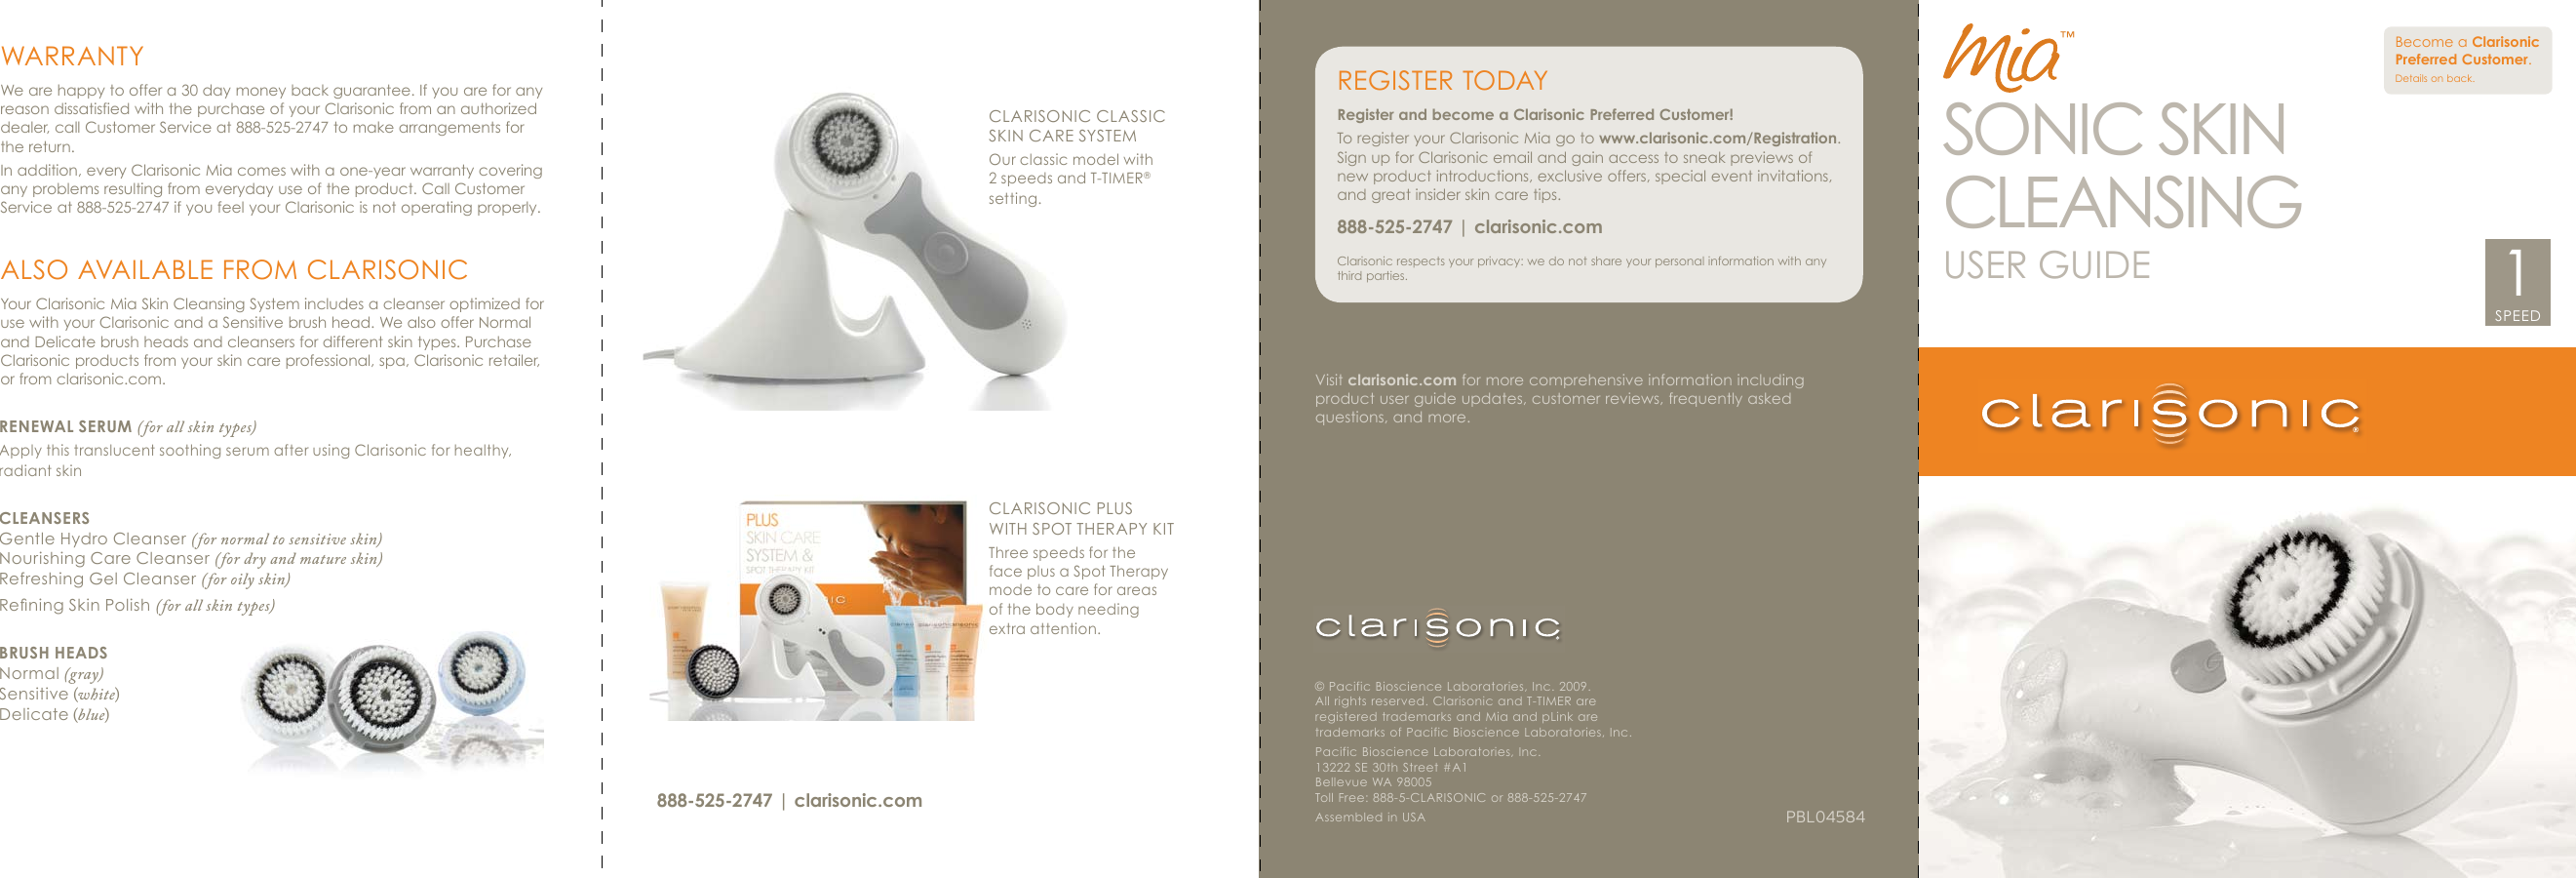 Visit clarisonic.com for more comprehensive information including product user guide updates, customer reviews, frequently asked questions, and more.PBL04584© Pacific Bioscience Laboratories, Inc. 2009. All rights reserved. Clarisonic and T-TIMER are registered trademarks and Mia and pLink are trademarks of Pacific Bioscience Laboratories, Inc.Pacific Bioscience Laboratories, Inc. 13222 SE 30th Street #A1Bellevue WA 98005Toll Free: 888-5-CLARISONIC or 888-525-2747Assembled in USA™RENEWAL SERUM (for all skin types)Apply this translucent soothing serum after using Clarisonic for healthy, radiant skinCLEANSERSGentle Hydro Cleanser (for normal to sensitive skin)Nourishing Care Cleanser (for dry and mature skin)Refreshing Gel Cleanser (for oily skin)Rening Skin Polish (for all skin types)BRUSH HEADSNormal (gray)Sensitive (white)Delicate (blue)CLARISONIC PLUS WITH SPOT THERAPY KITThree speeds for the face plus a Spot Therapy mode to care for areas of the body needing extra attention.CLARISONIC CLASSIC SKIN CARE SYSTEMOur classic model with 2 speeds and T-TIMER® setting.WARRANTYWe are happy to offer a 30 day money back guarantee. If you are for any reason dissatisfied with the purchase of your Clarisonic from an authorized dealer, call Customer Service at 888-525-2747 to make arrangements for the return.In addition, every Clarisonic Mia comes with a one-year warranty covering any problems resulting from everyday use of the product. Call Customer Service at 888-525-2747 if you feel your Clarisonic is not operating properly.ALSO AVAILABLE FROM CLARISONICYour Clarisonic Mia Skin Cleansing System includes a cleanser optimized for use with your Clarisonic and a Sensitive brush head. We also offer Normal and Delicate brush heads and cleansers for different skin types. Purchase Clarisonic products from your skin care professional, spa, Clarisonic retailer, or from clarisonic.com. REGISTER  TODAYRegister and become a Clarisonic Preferred Customer! To register your Clarisonic Mia go to www.clarisonic.com/Registration. Sign up for Clarisonic email and gain access to sneak previews of new product introductions, exclusive offers, special event invitations, and great insider skin care tips.888-525-2747 | clarisonic.comClarisonic respects your privacy: we do not share your personal information with any third parties.Become a Clarisonic Preferred Customer. Details on back.888-525-2747 | clarisonic.comSONIC SKINCLEANSINGUSER GUIDESPEED1